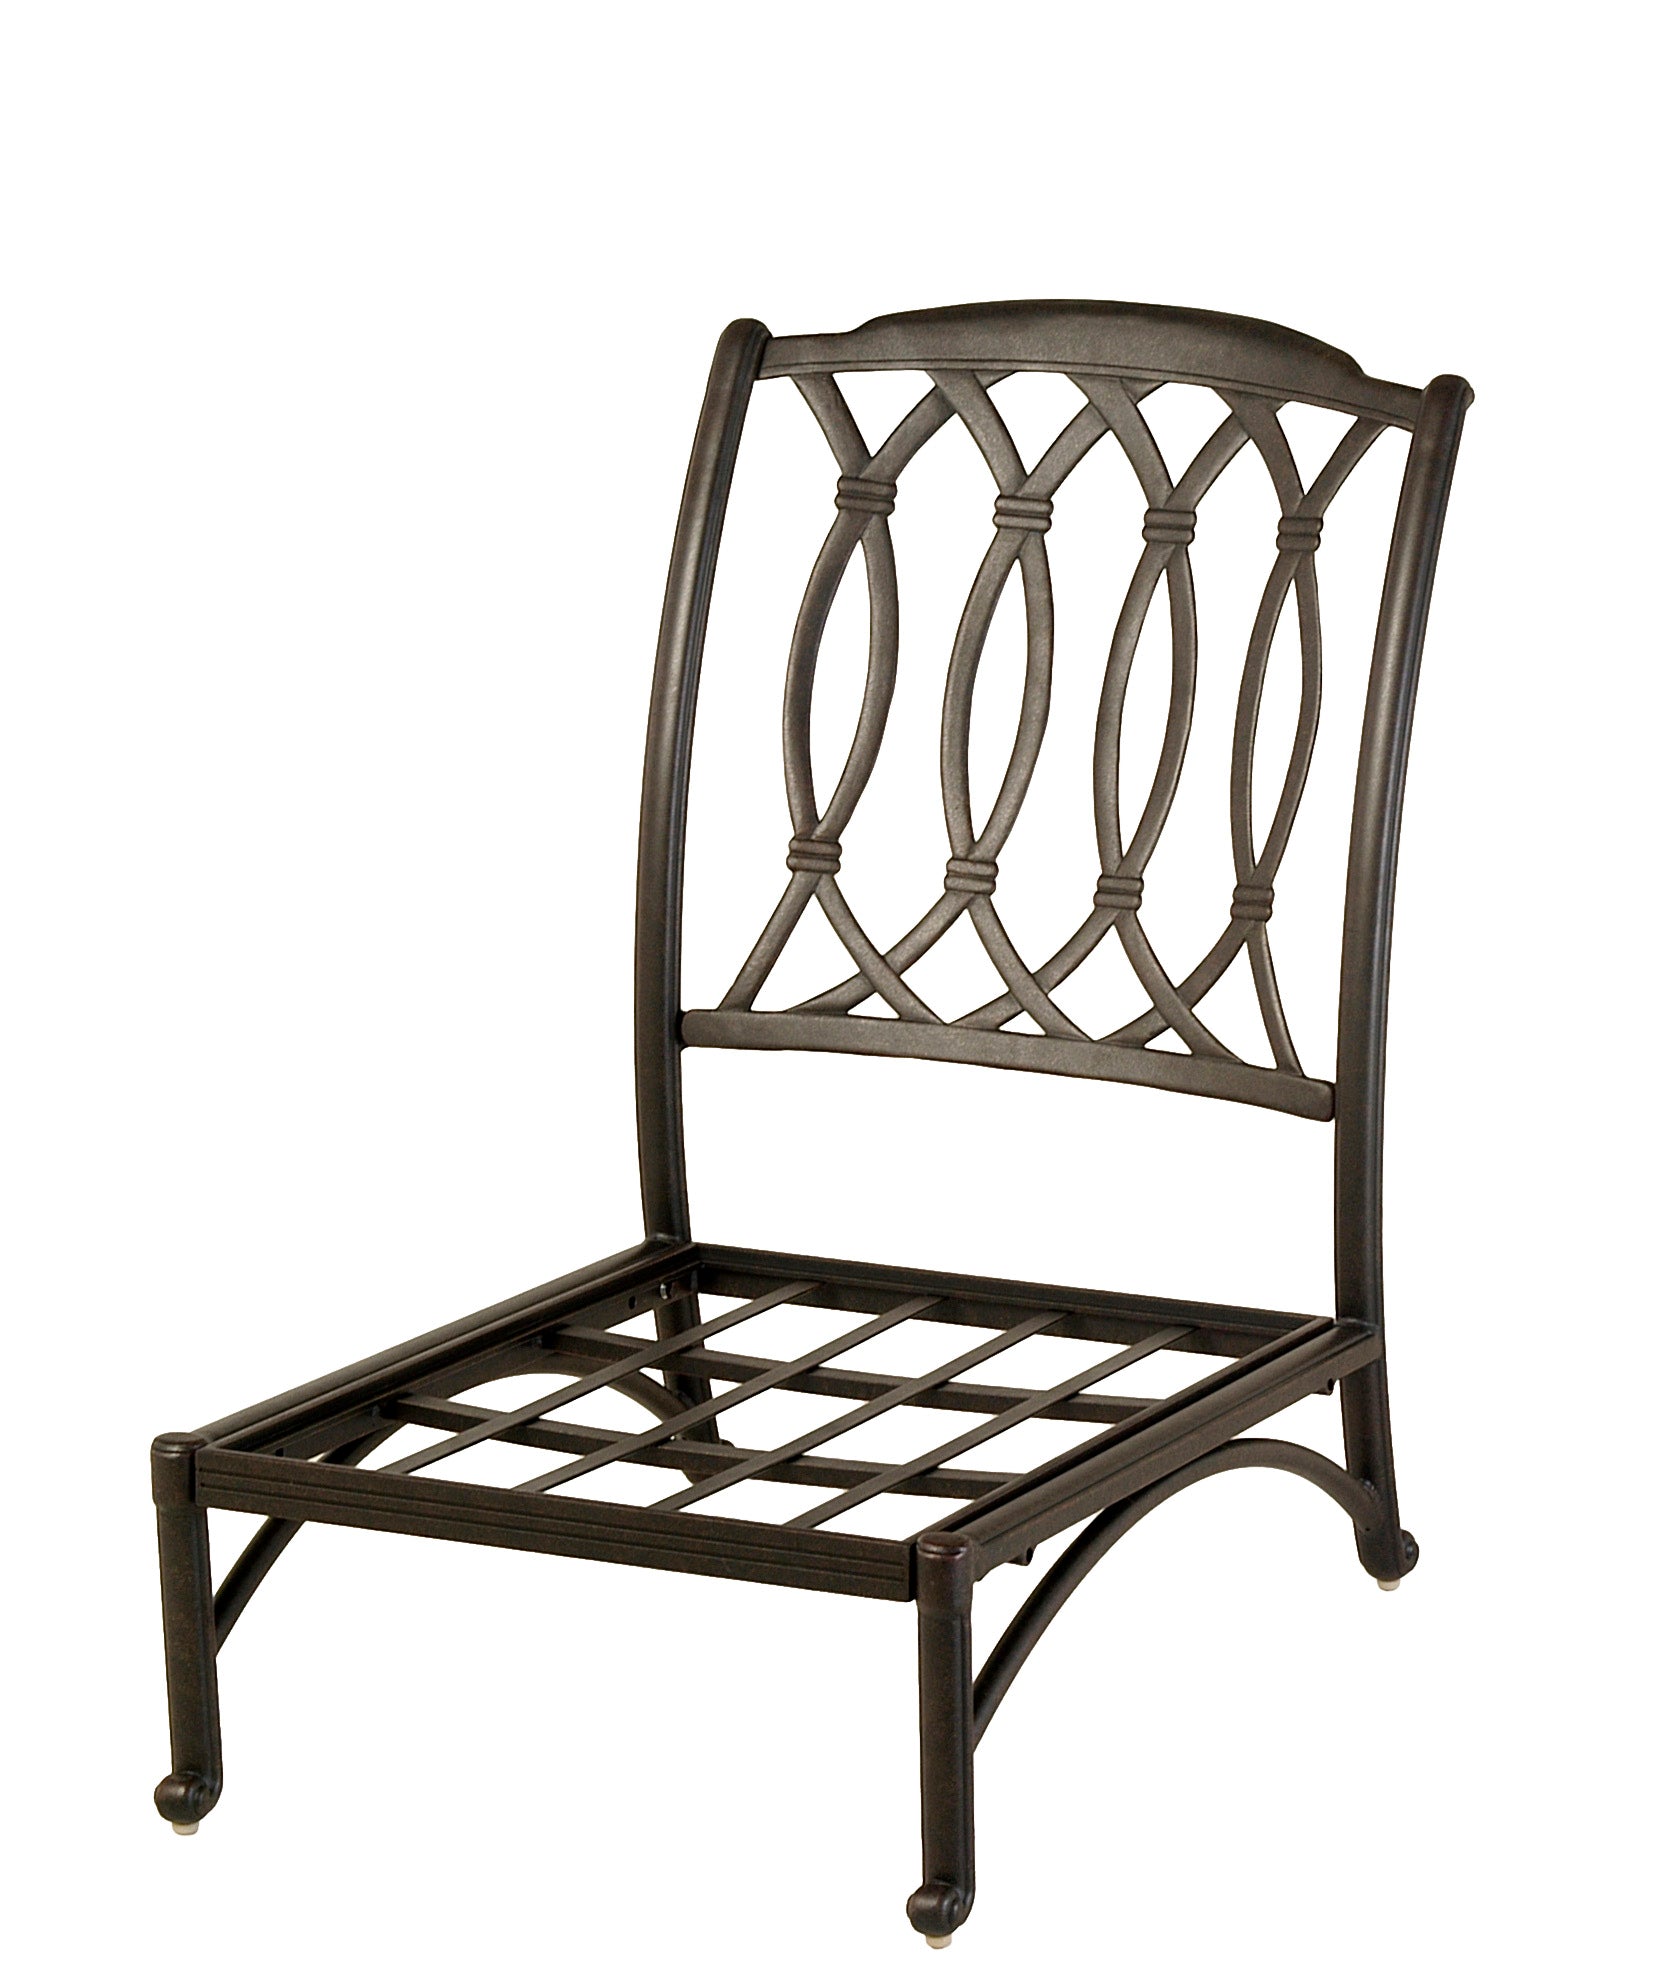 Hanamint Mayfair Estate Club Middle Chair Outdoor Chairs 12026016